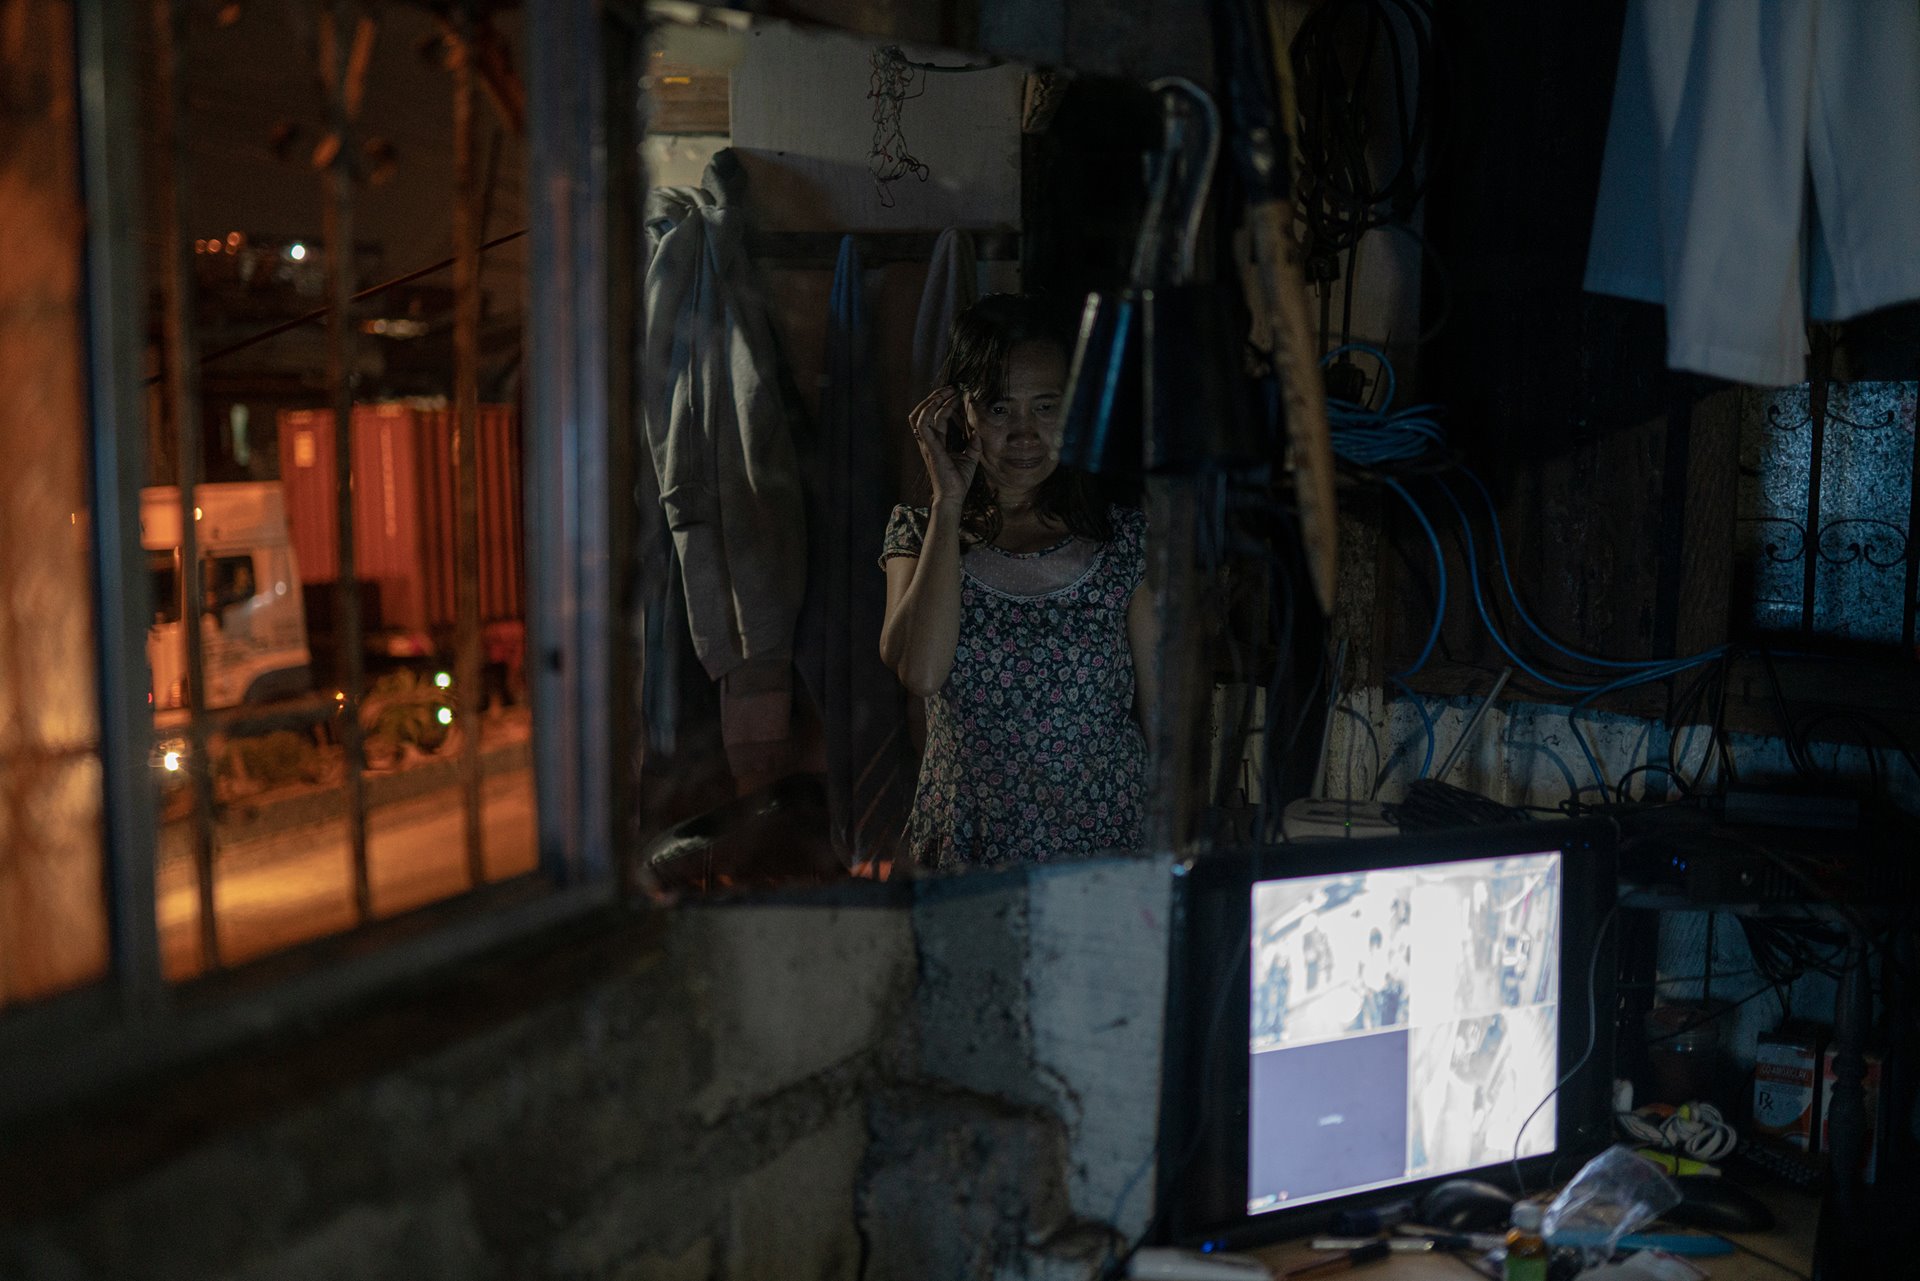 Jovelyn Habal stands beside the CCTV she had installed after her husband was killed by unidentified gunmen outside their house in Binondo, Manila, the Philippines, a year previously. Jovelyn is part of Paghilom (Healing), a program started in 2017 by former drug user Father Flaviano Villanueva for families of victims of the war on drugs, providing them with support and counseling.